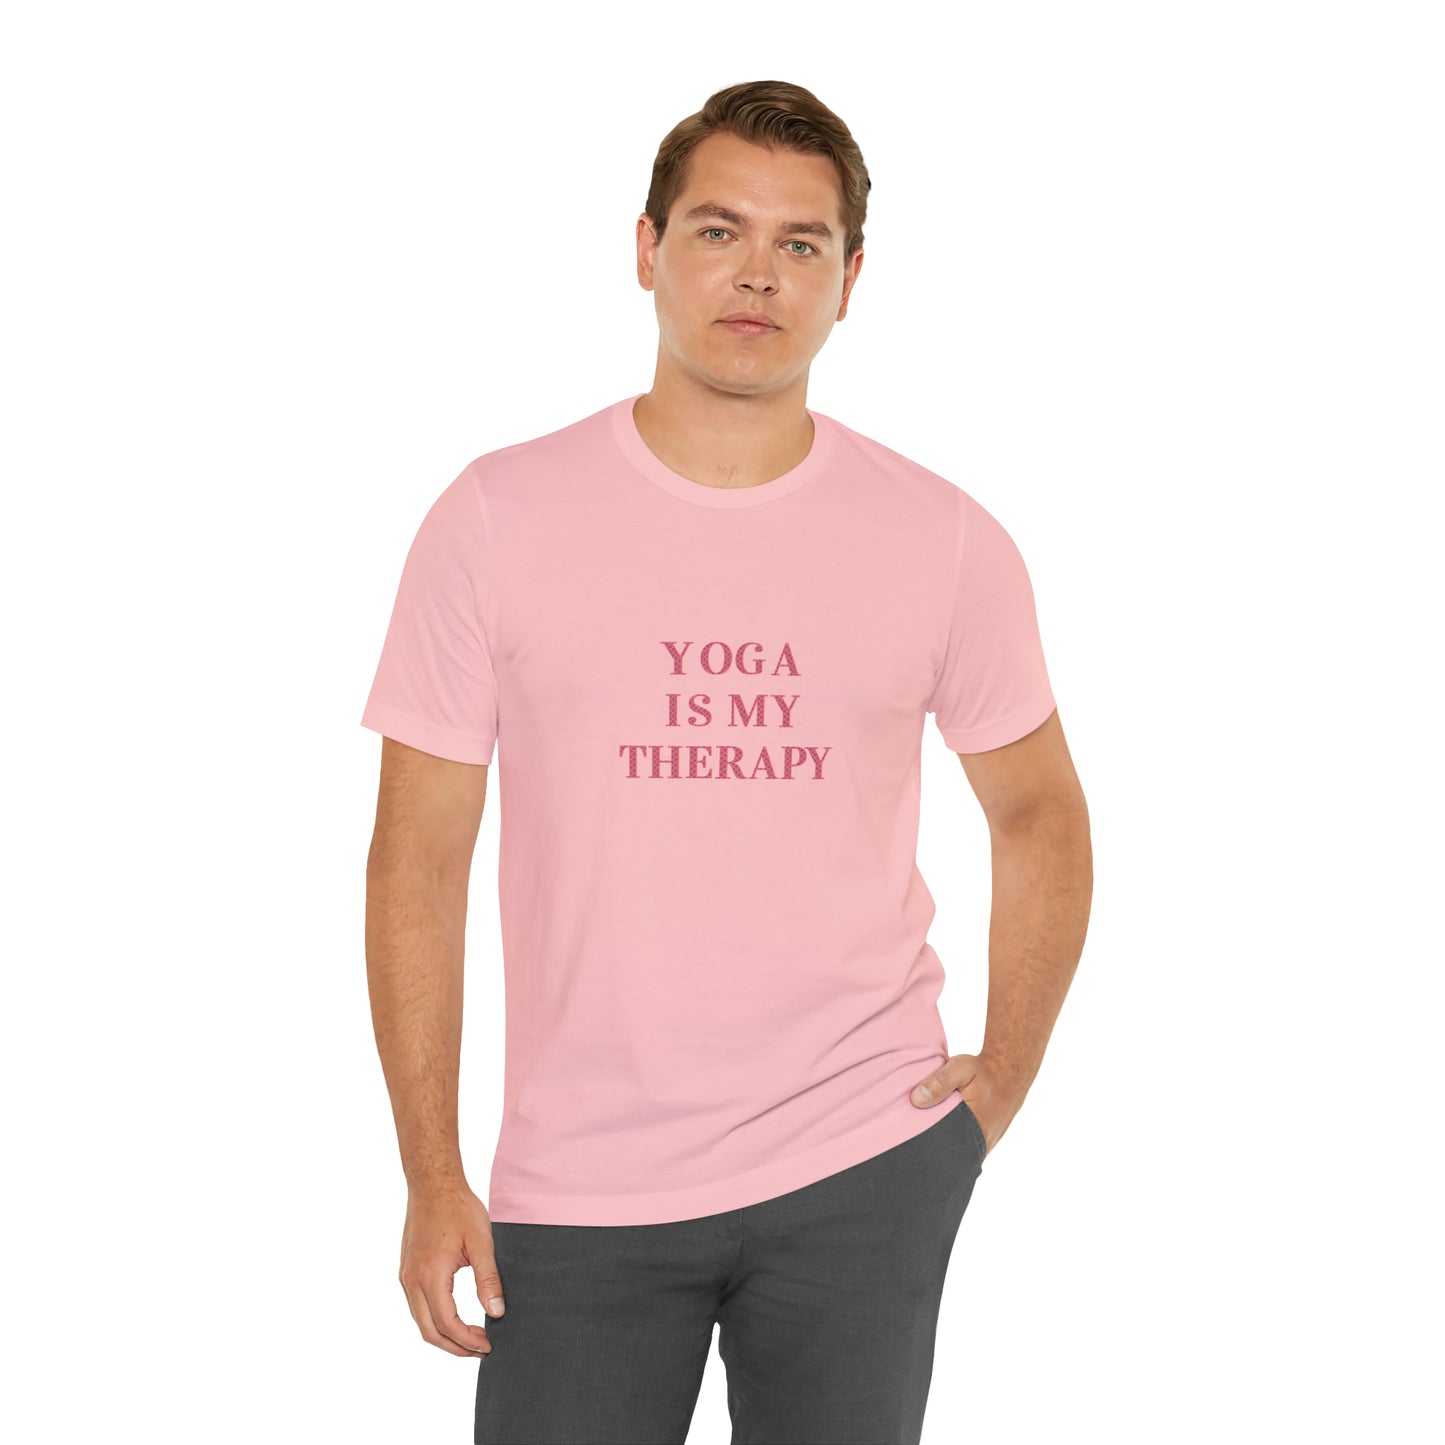 Yoga Is My Therapy- Adult, Regular Fit, Soft Cotton, Smaller Size Image, T-shirt